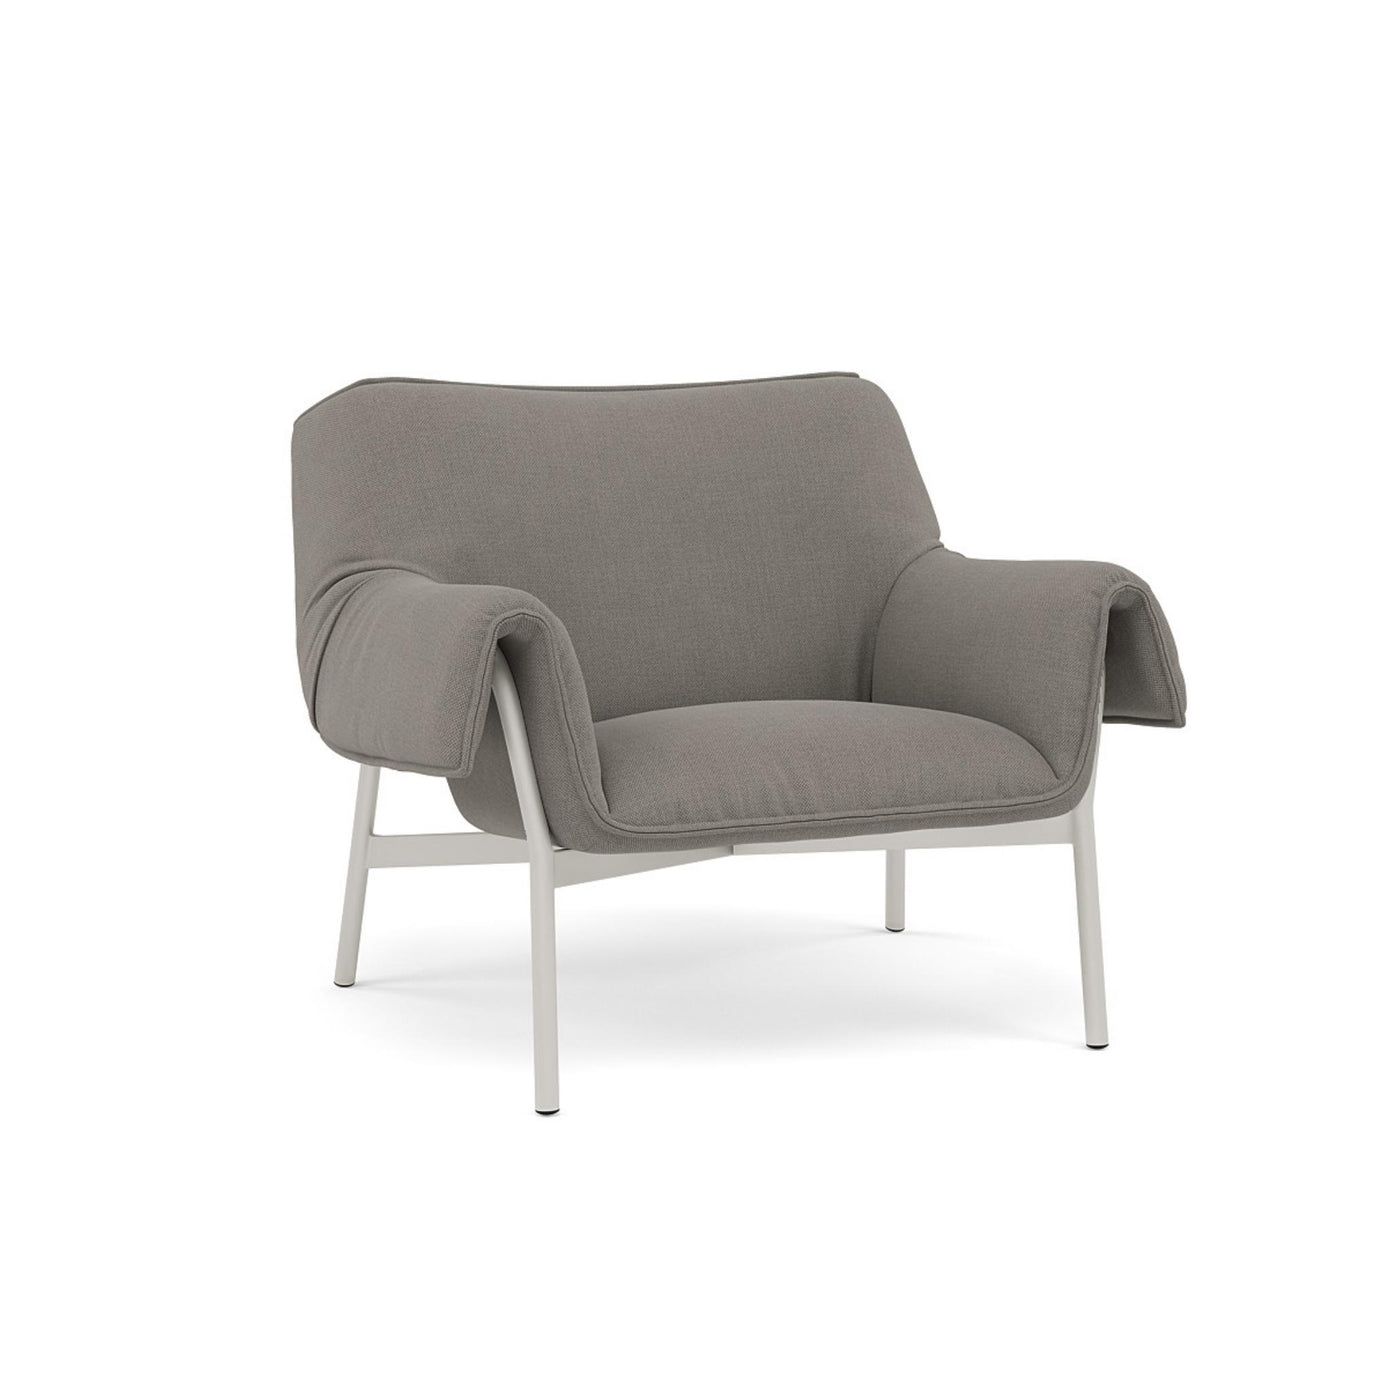 Muuto Wrap Lounge Chair. Made to order from someday designs. #colour_fiord-262